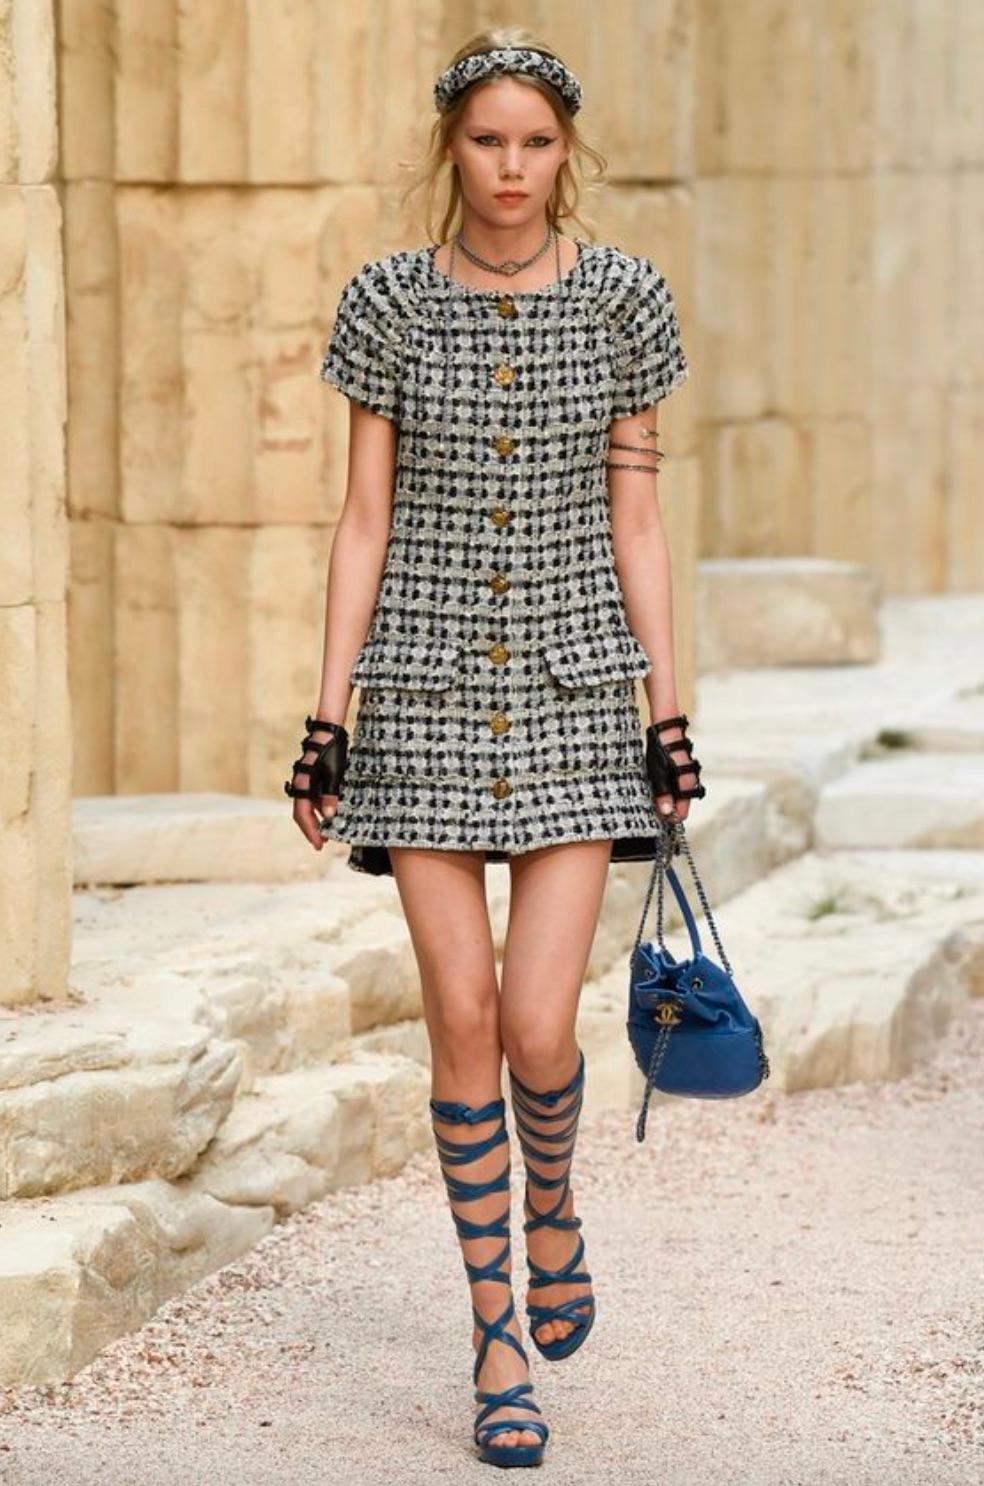 Presenting Look 34 from Chanel's 2018 Cruise Collection, 